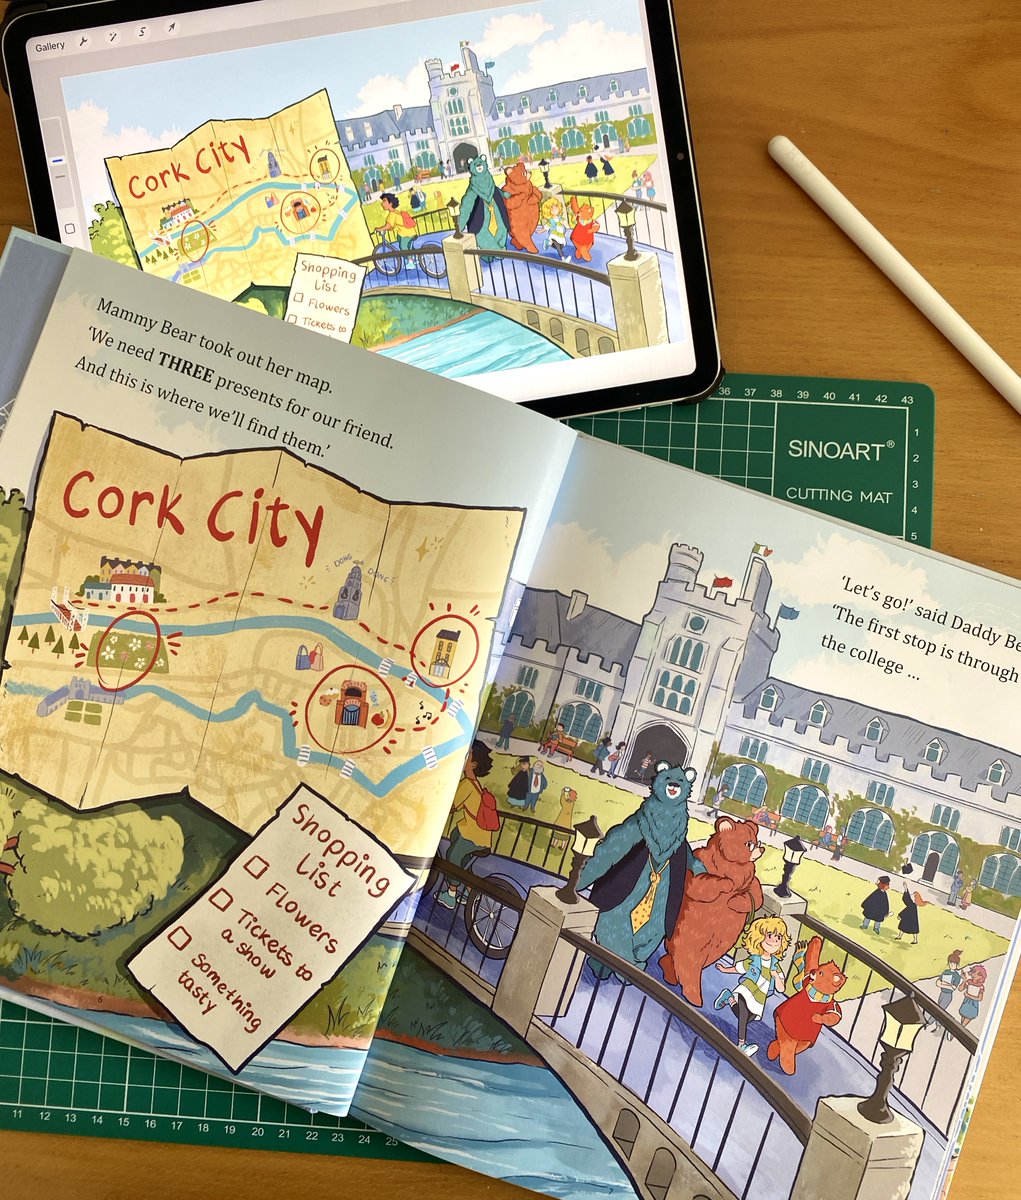 UCC graduate writes fairytale with a Cork twist @Amylouioc has written and illustrated a modern take on a much-loved tale in 'A Cork Fairytale', out now bit.ly/UCCCF24